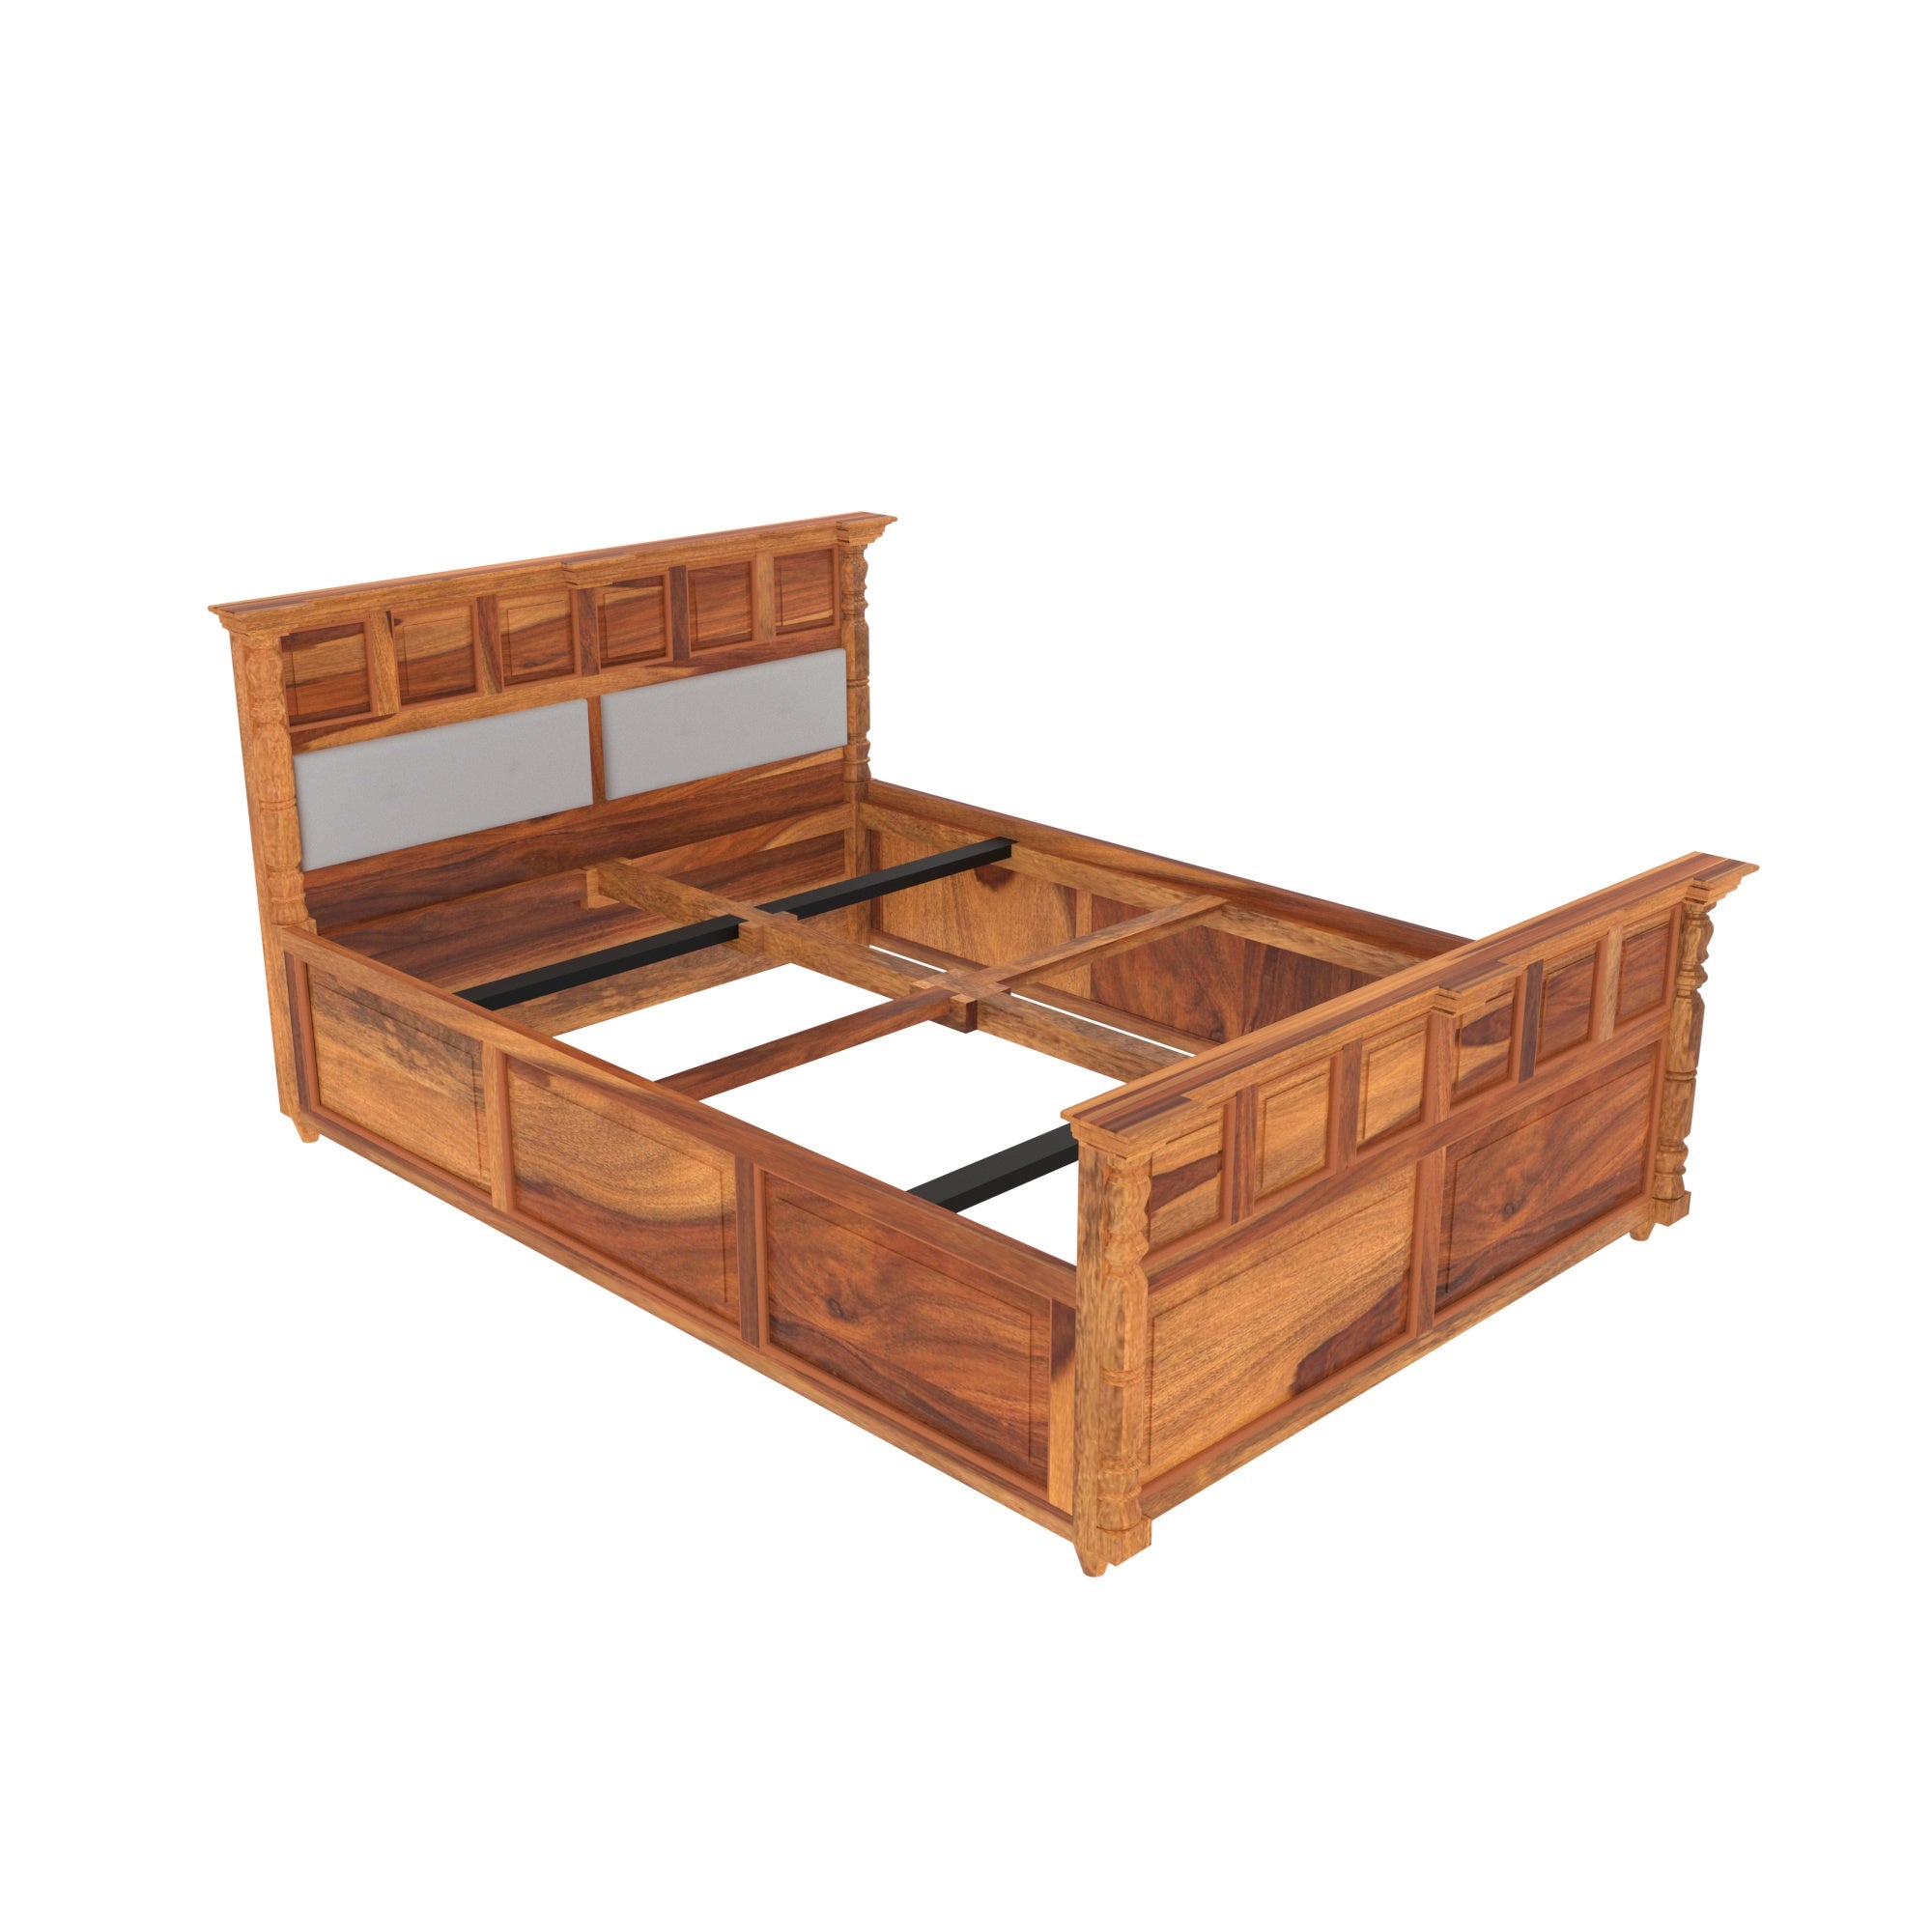 Traditional Linear Double Bed Sheesham Wood Bed